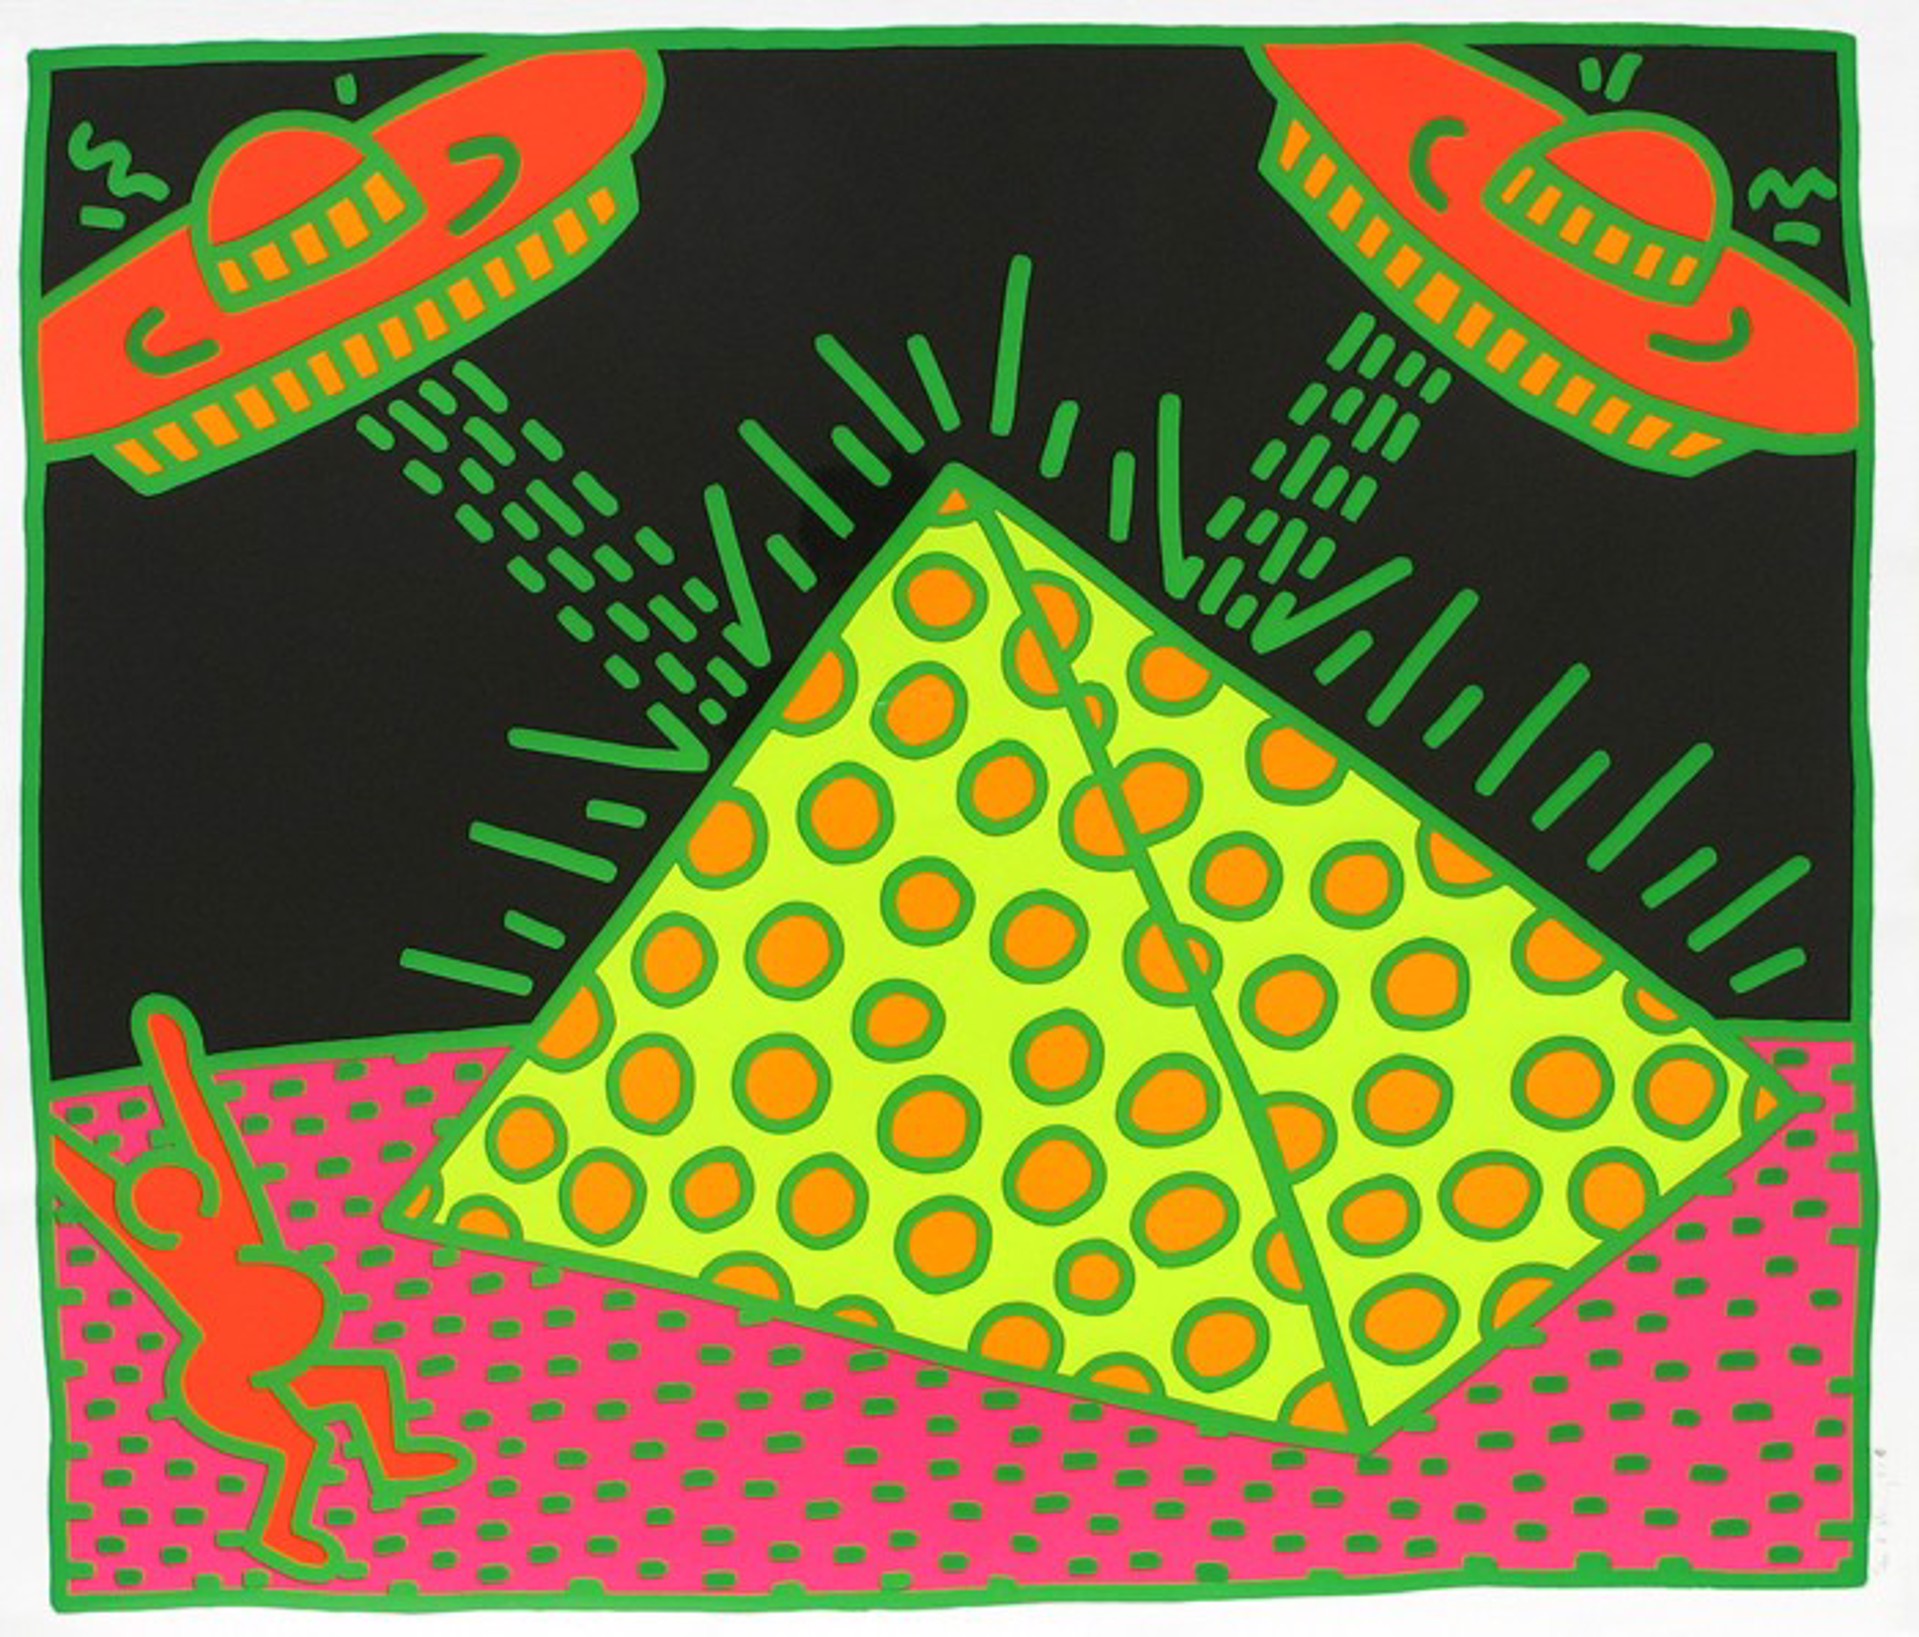 Untitled #2 (Fertility Series) by Keith Haring